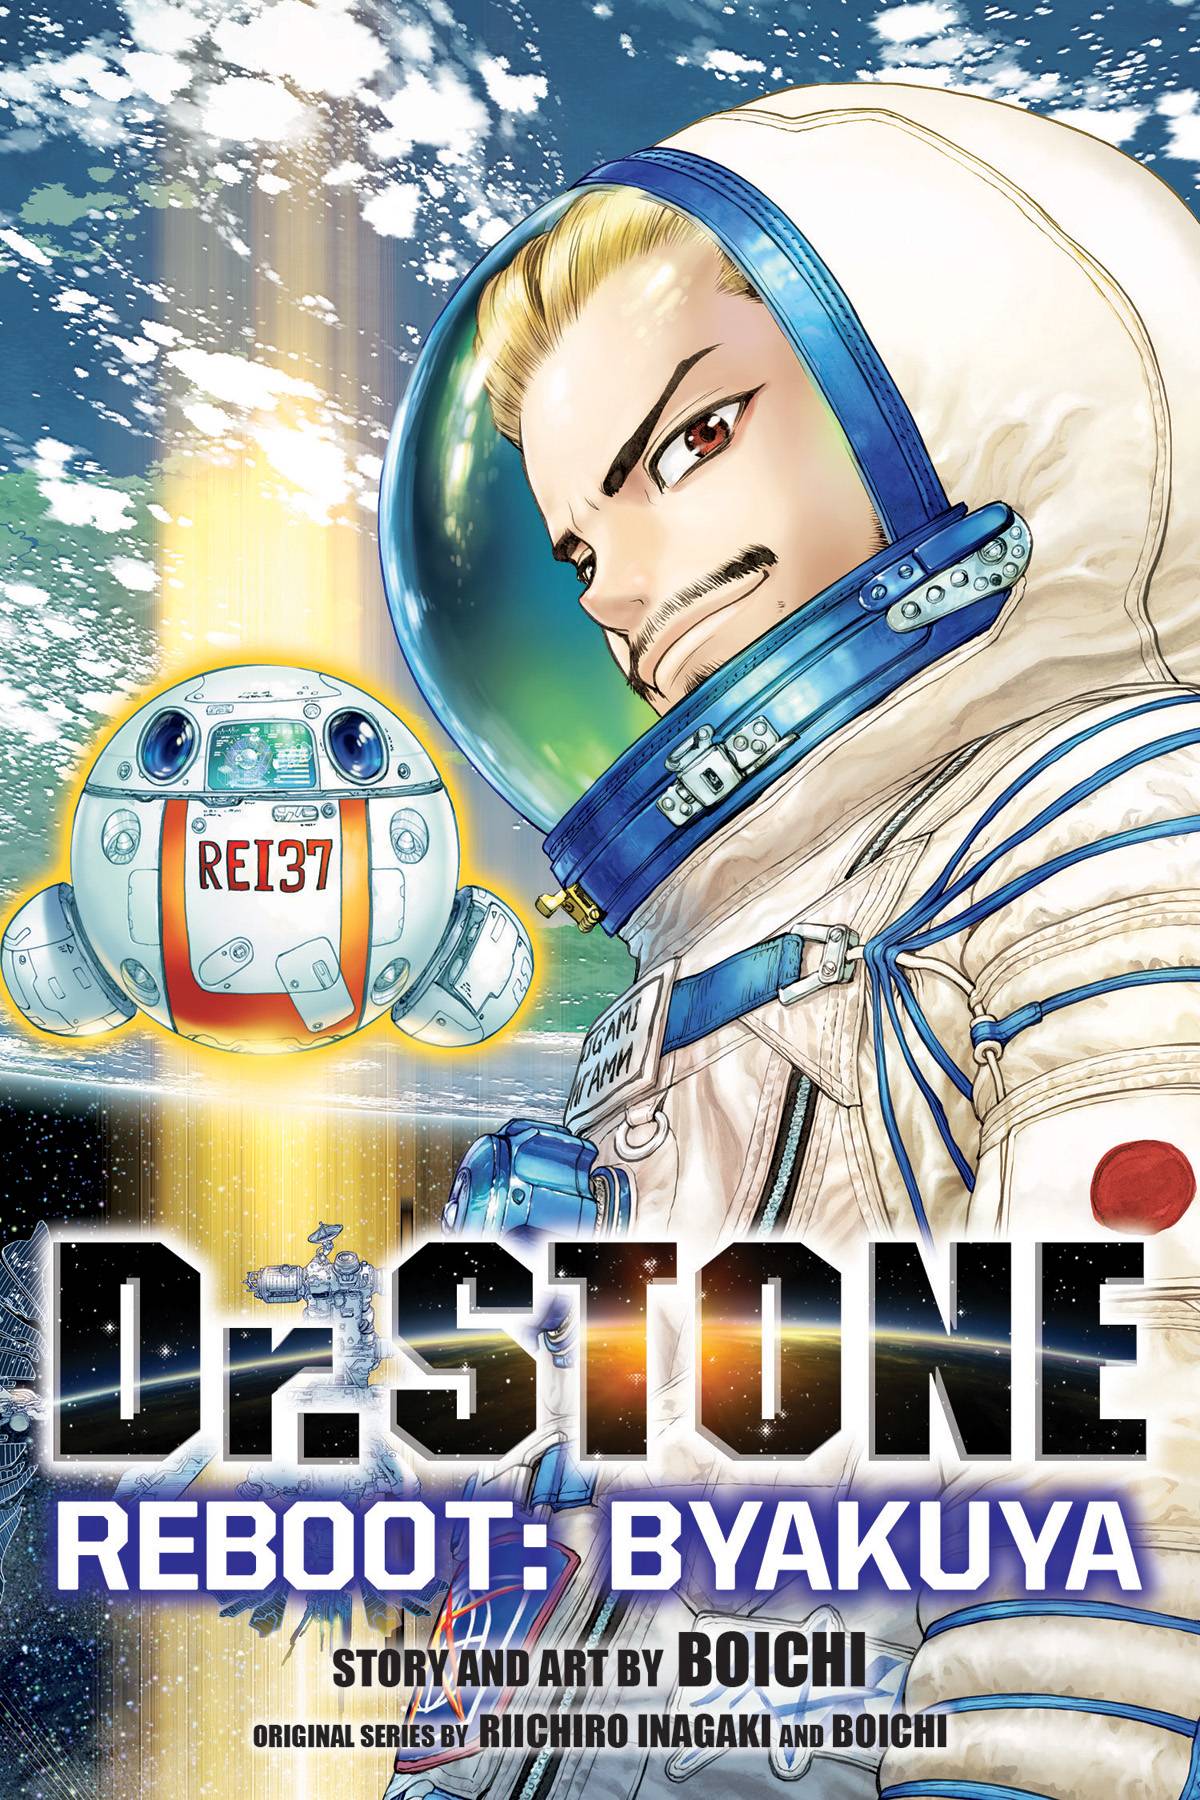 A man with slicked back blond hair and a dark moustache and goatee hovers in space, dressed in an astronaut's spacesuit. A spherical spaceship labelled 'REI37' is bathed in light behind him, and a blue and green planet takes up most of the frame behind that.